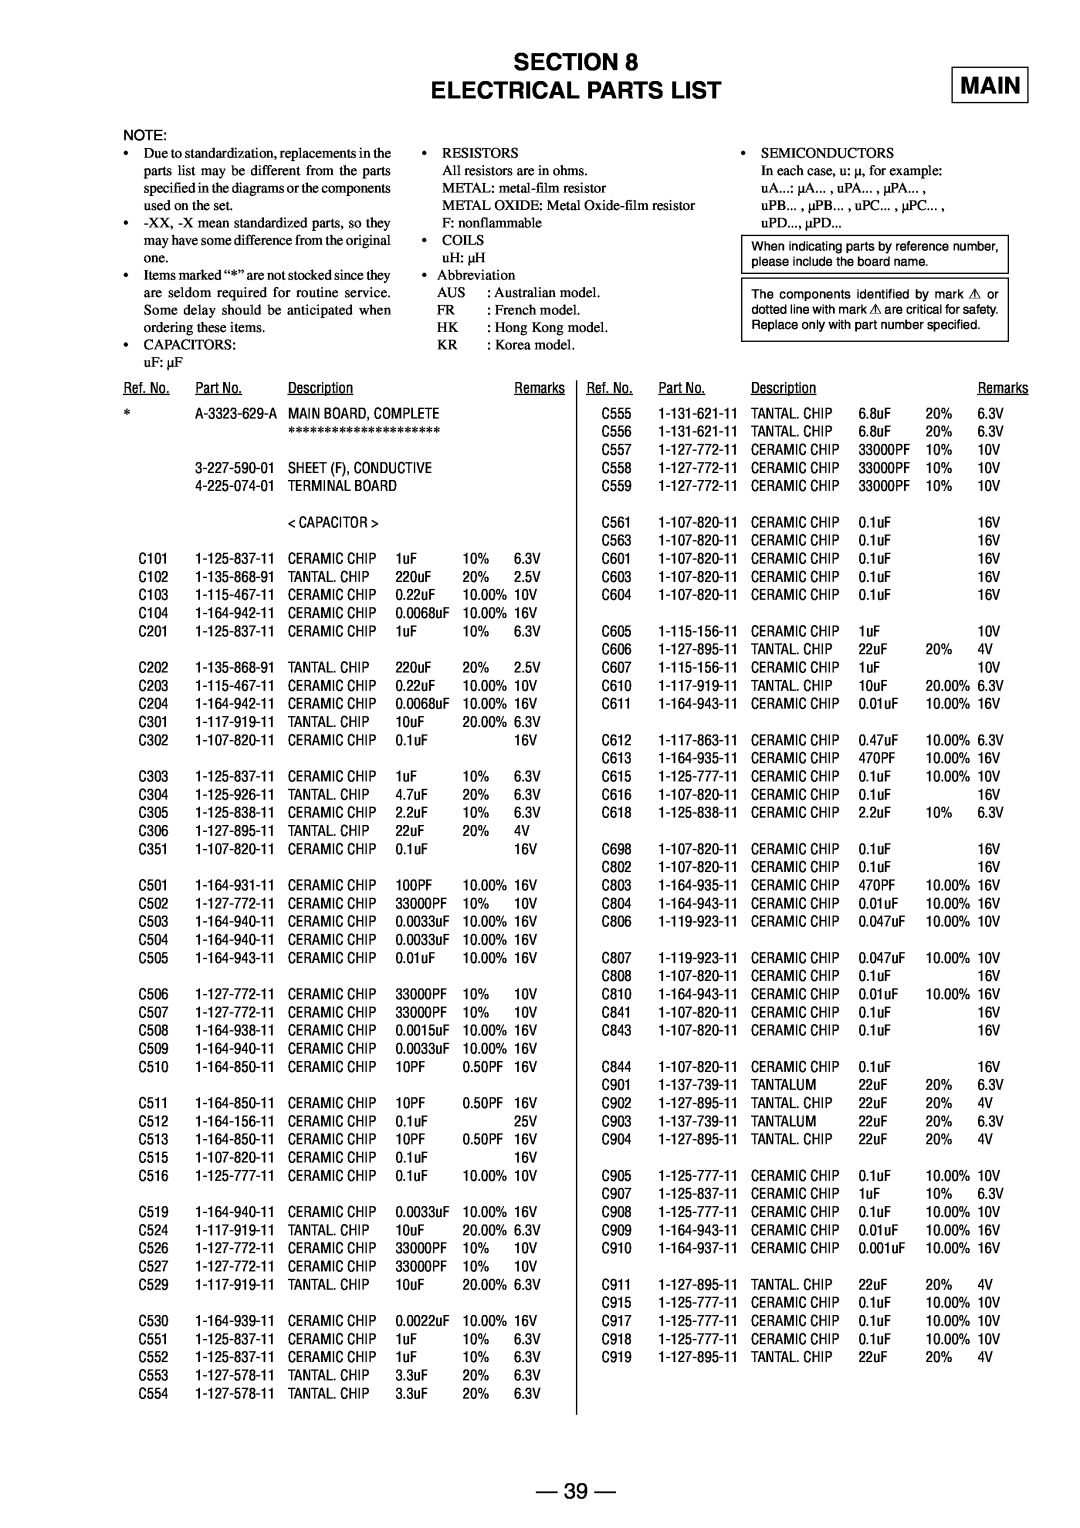 Sony MX-E500 specifications Section Electrical Parts List, Main 